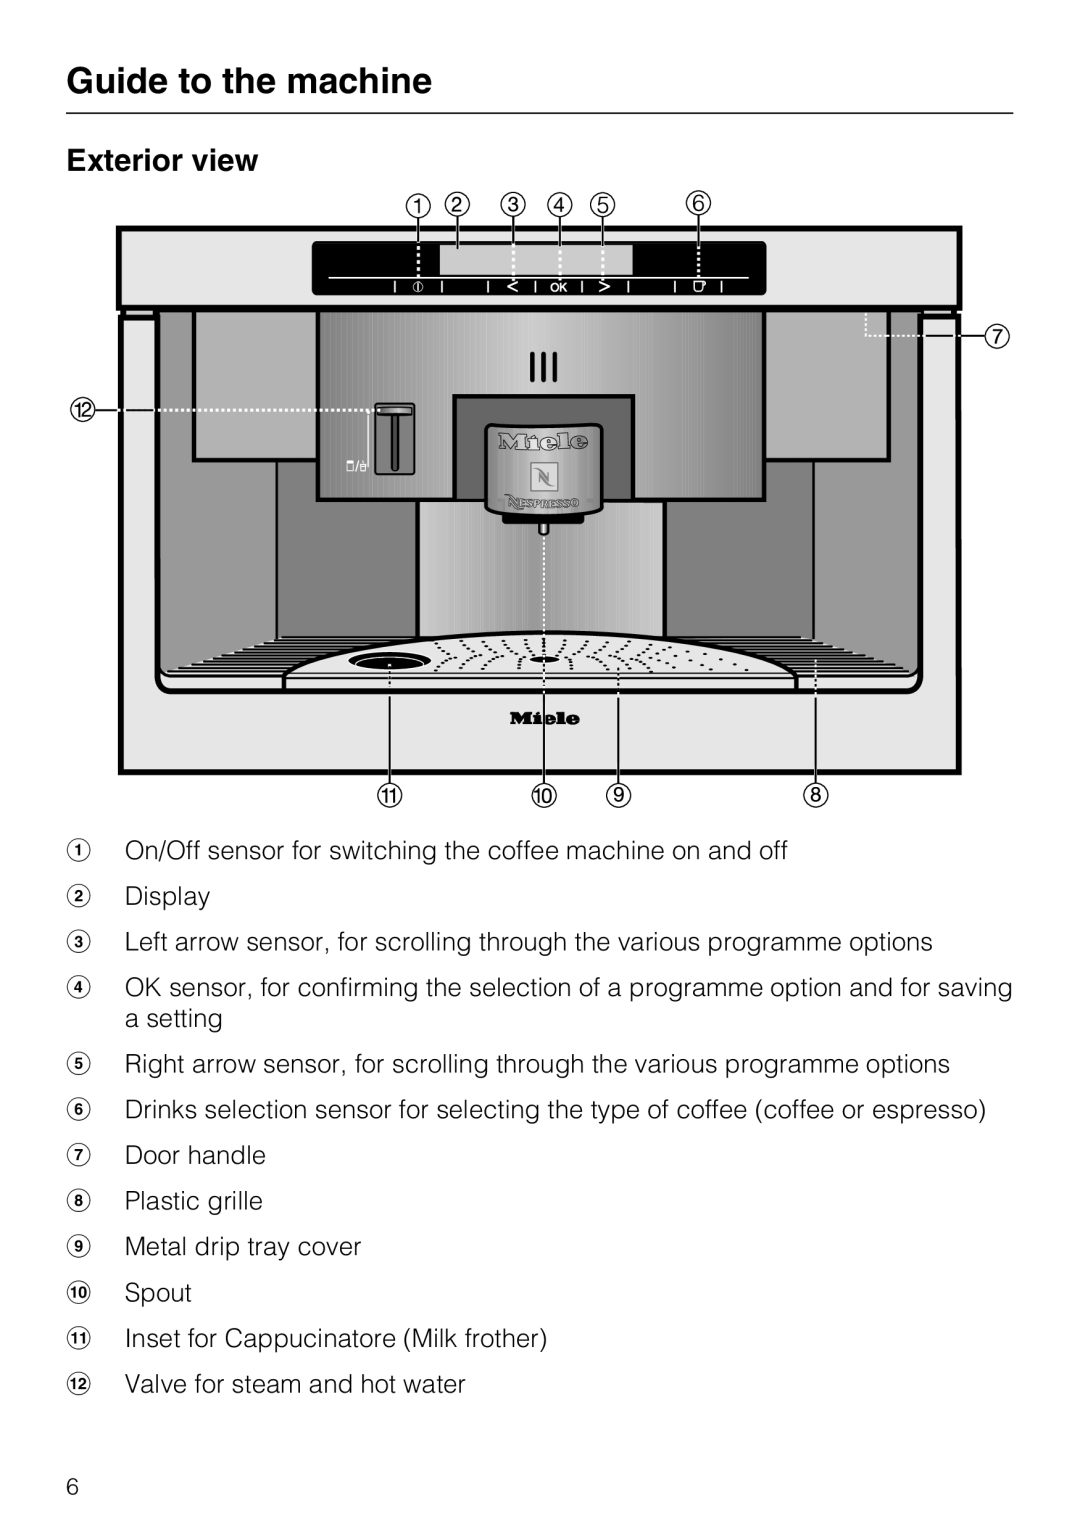 Miele CVA 3650 installation instructions Guide to the machine, Exterior view 